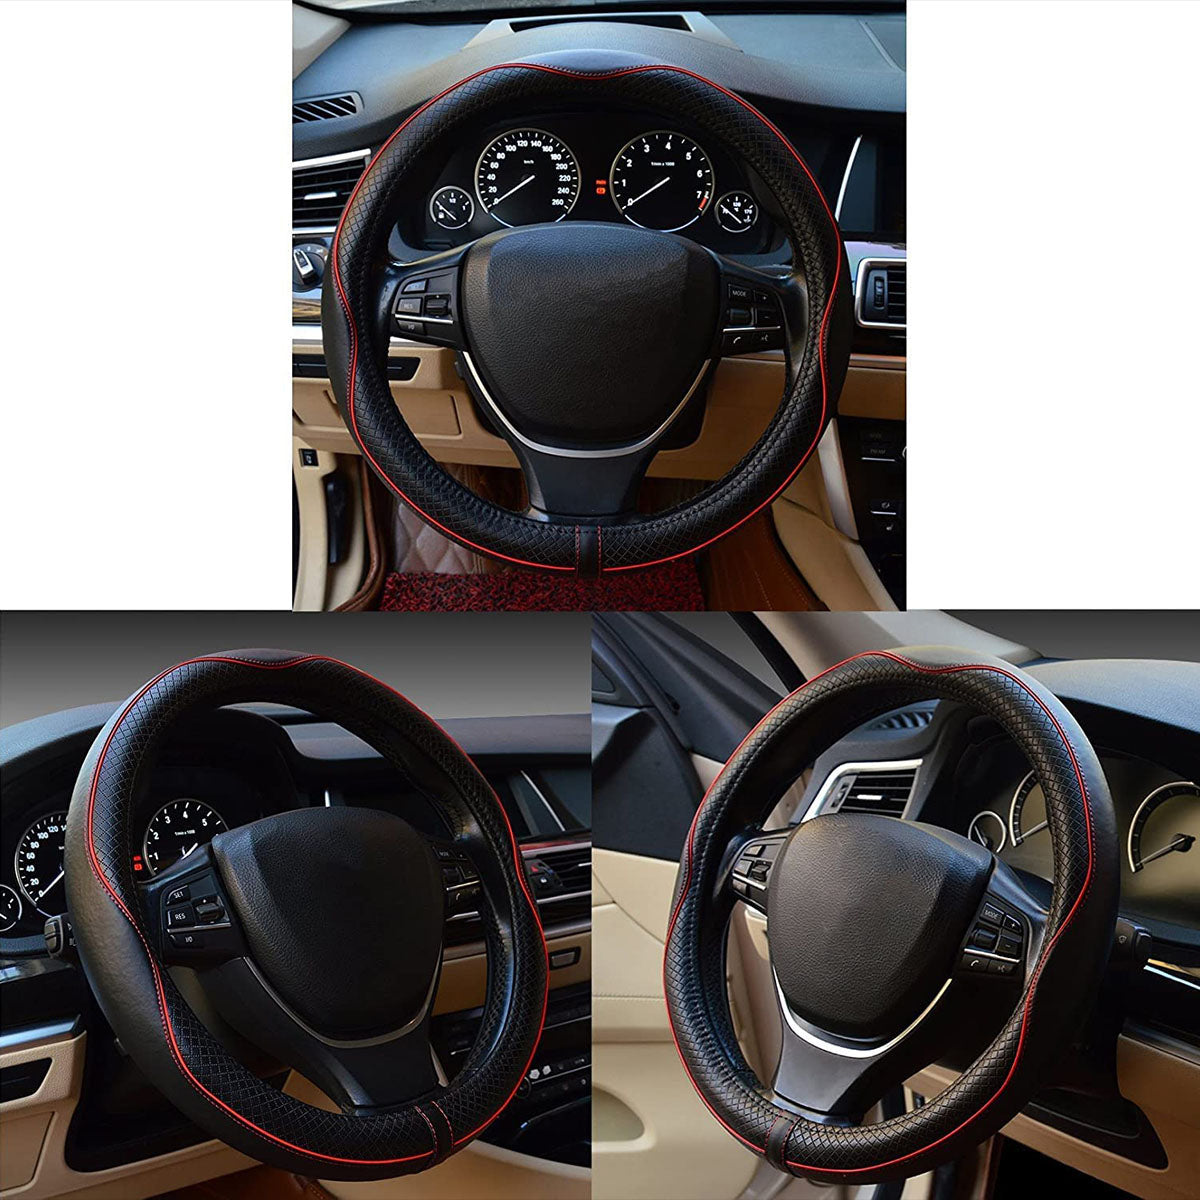 Car Steering Wheel Cover, Custom For Your Cars, Anti-Slip, Safety, Soft, Breathable, Heavy Duty, Thick, Full Surround, Sports Style, Car Accessories KO18990